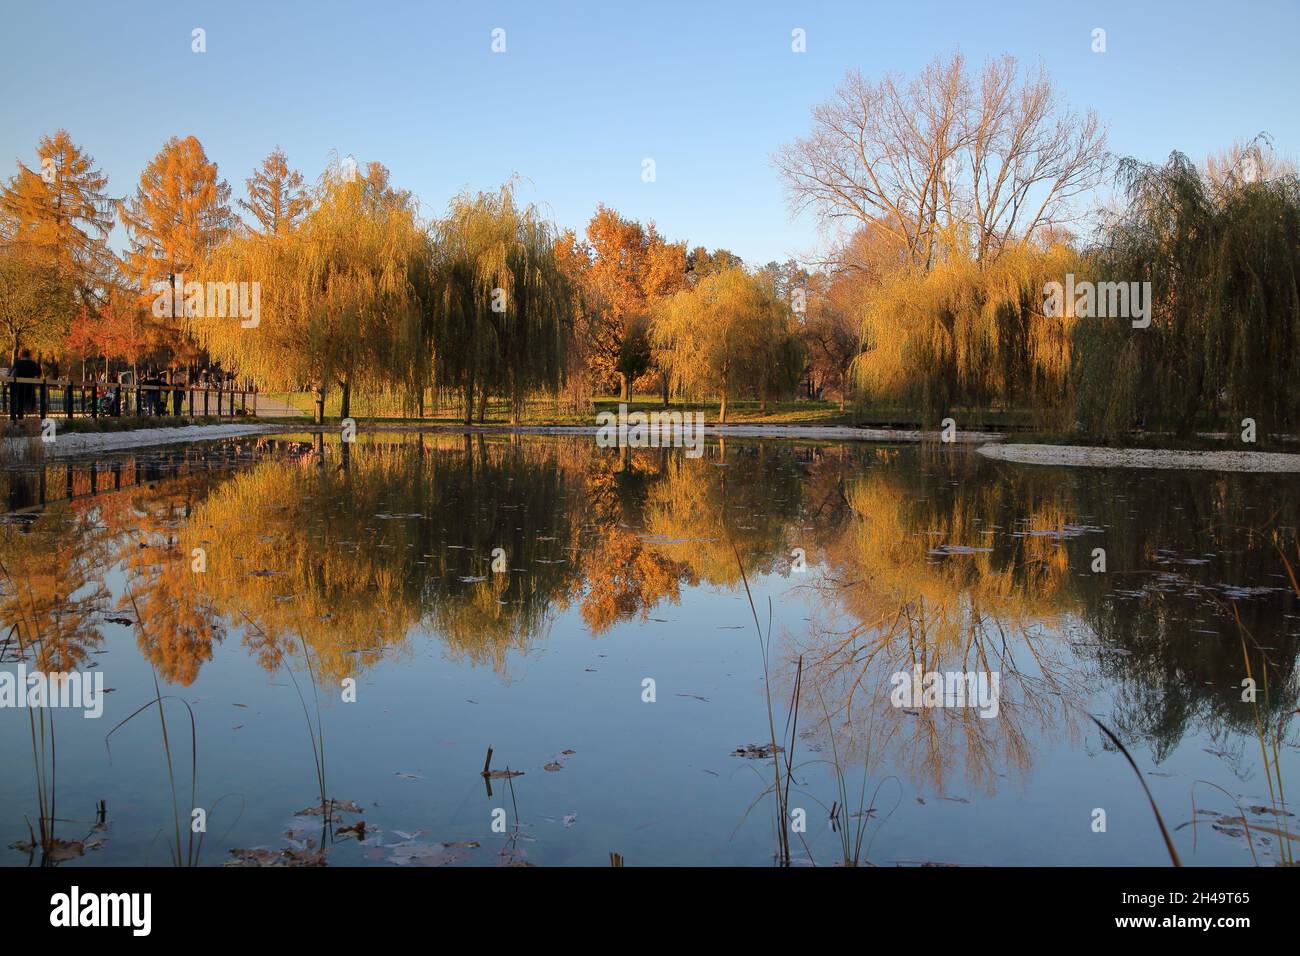 Beautiful scenery of autumnal park, trees with colorful foliage reflected in pond lake surface. Stock Photo